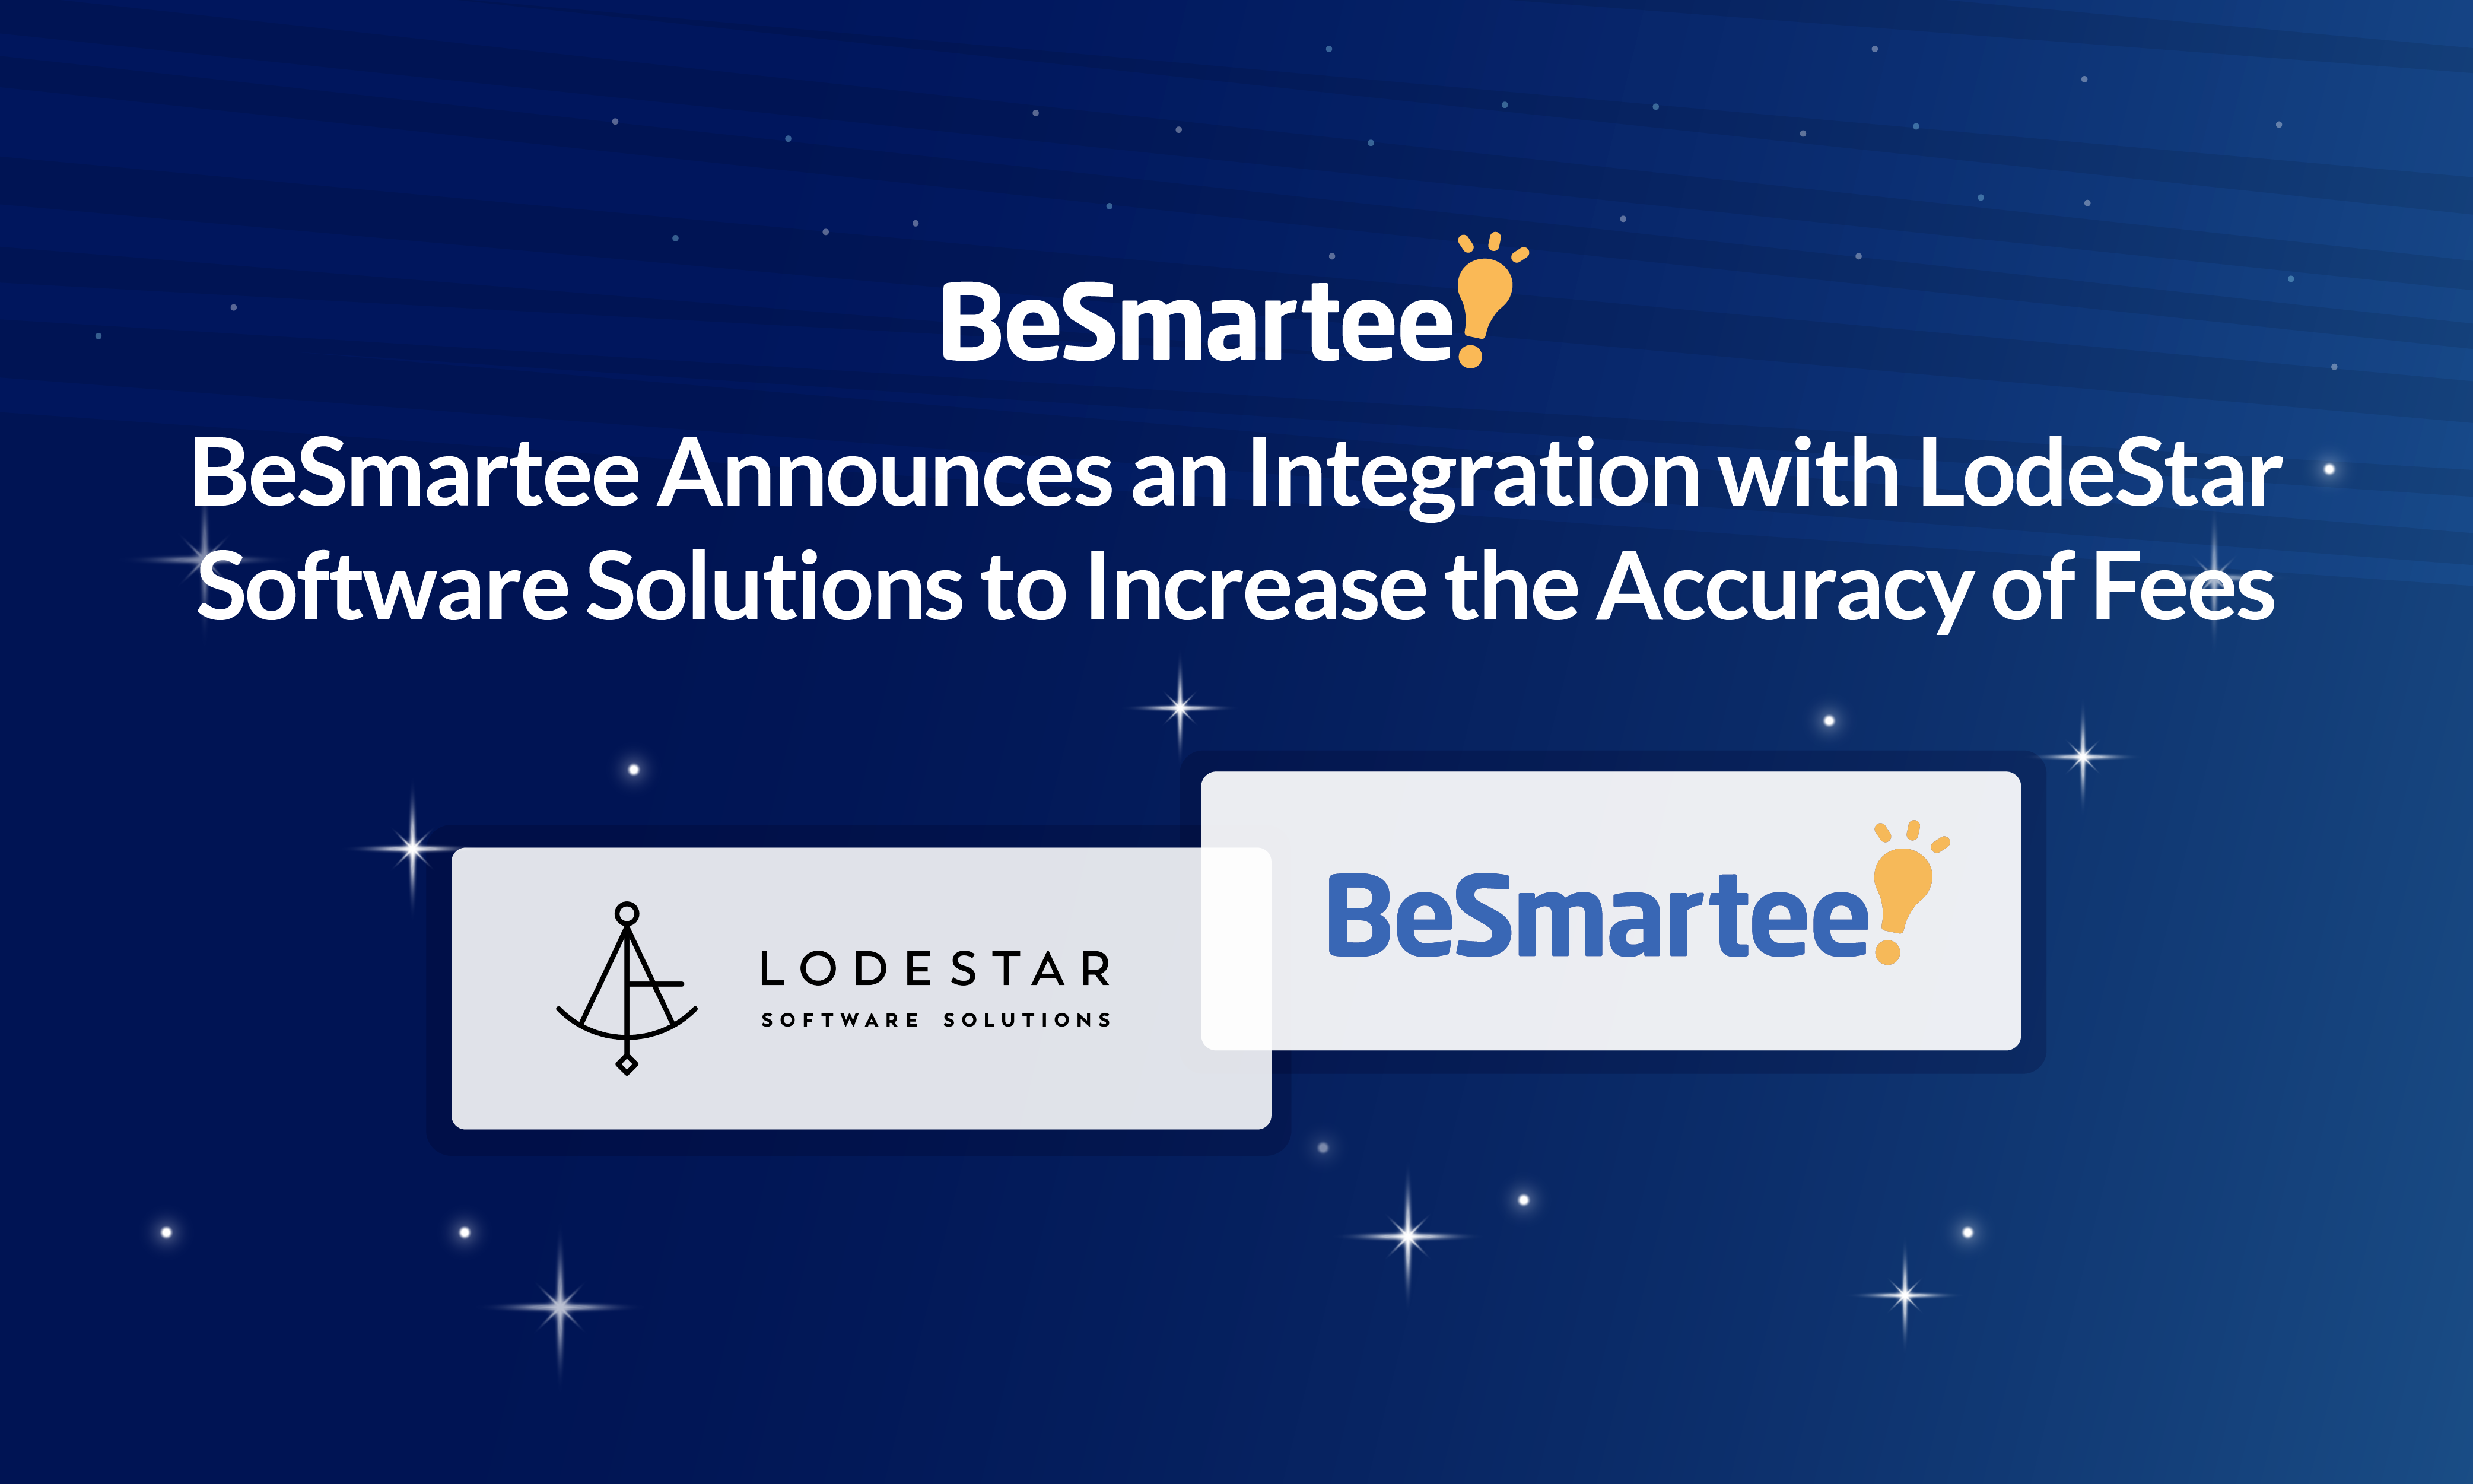 BeSmartee Announces an Integration with LodeStar Software Solutions to Increase the Accuracy of Fees